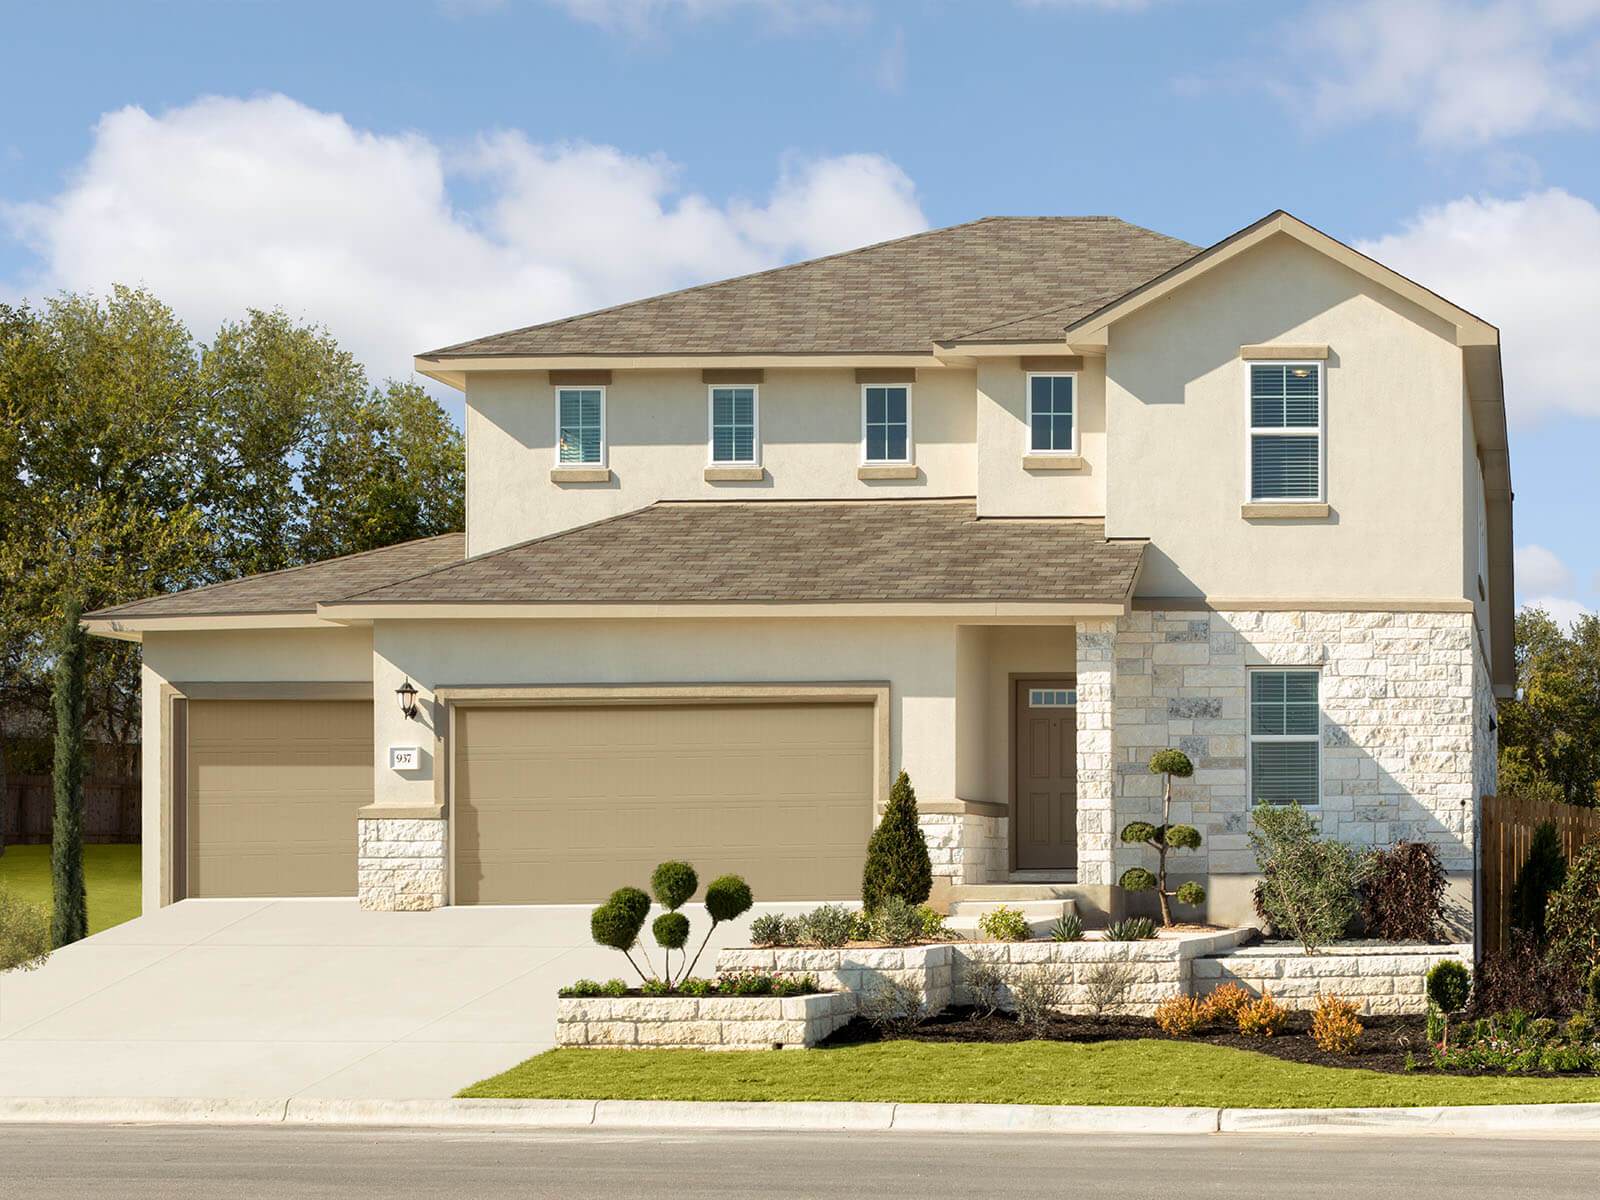 The Kessler is one of many exquisite plans to choose from at Durango Farms.